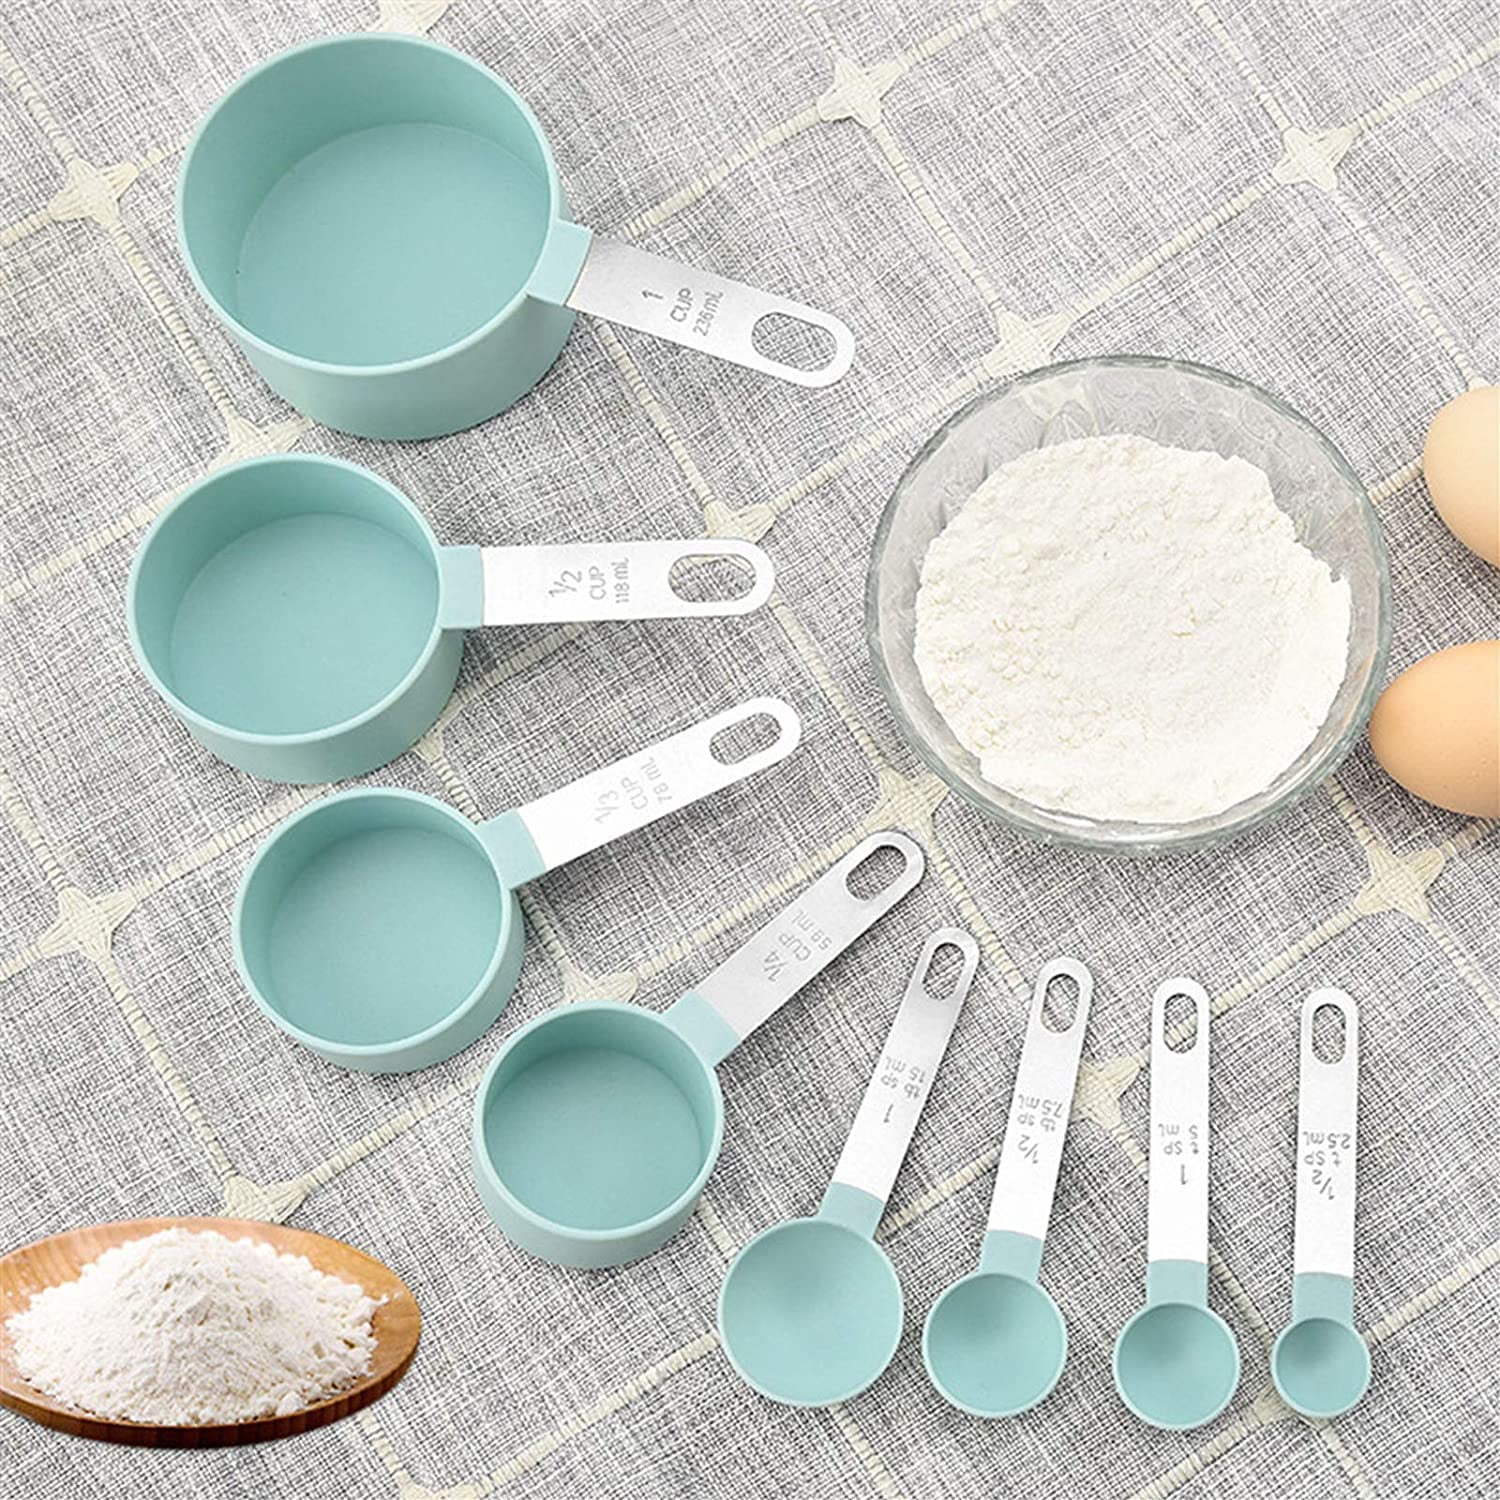 Measuring Cups and Spoons Set of 8 Pieces Metal Cups Water